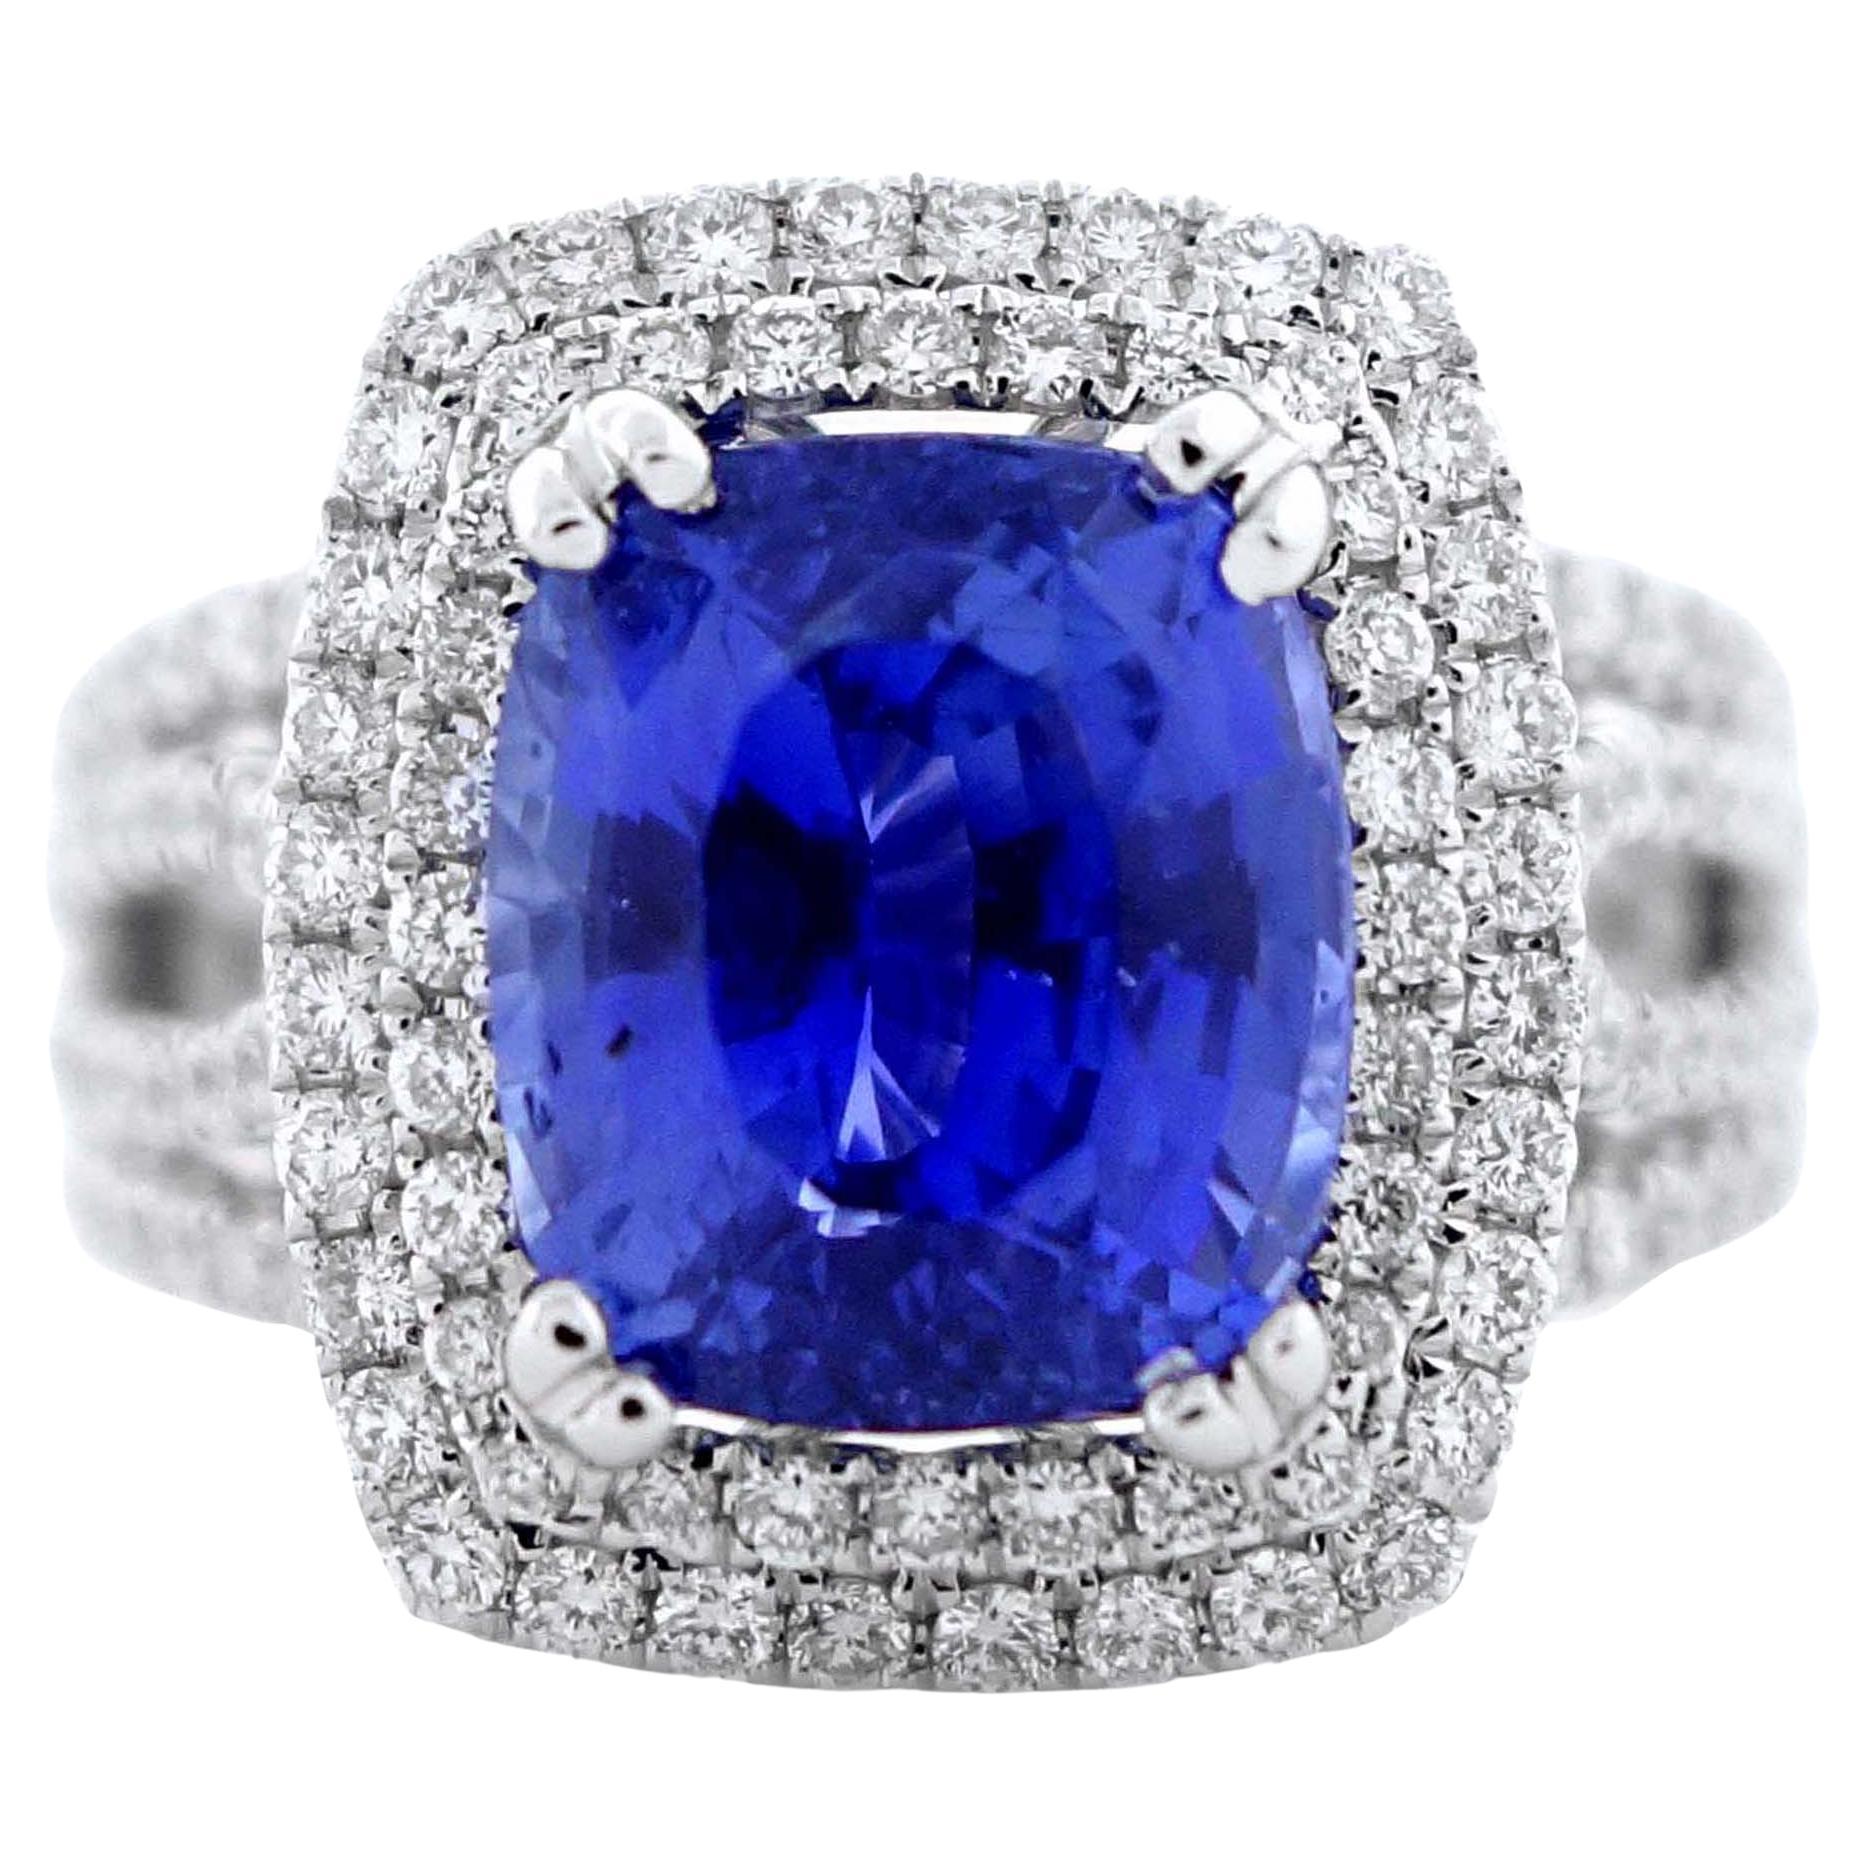 4.27 Carat Cushion Sapphire Ring in 18k White Gold For Sale